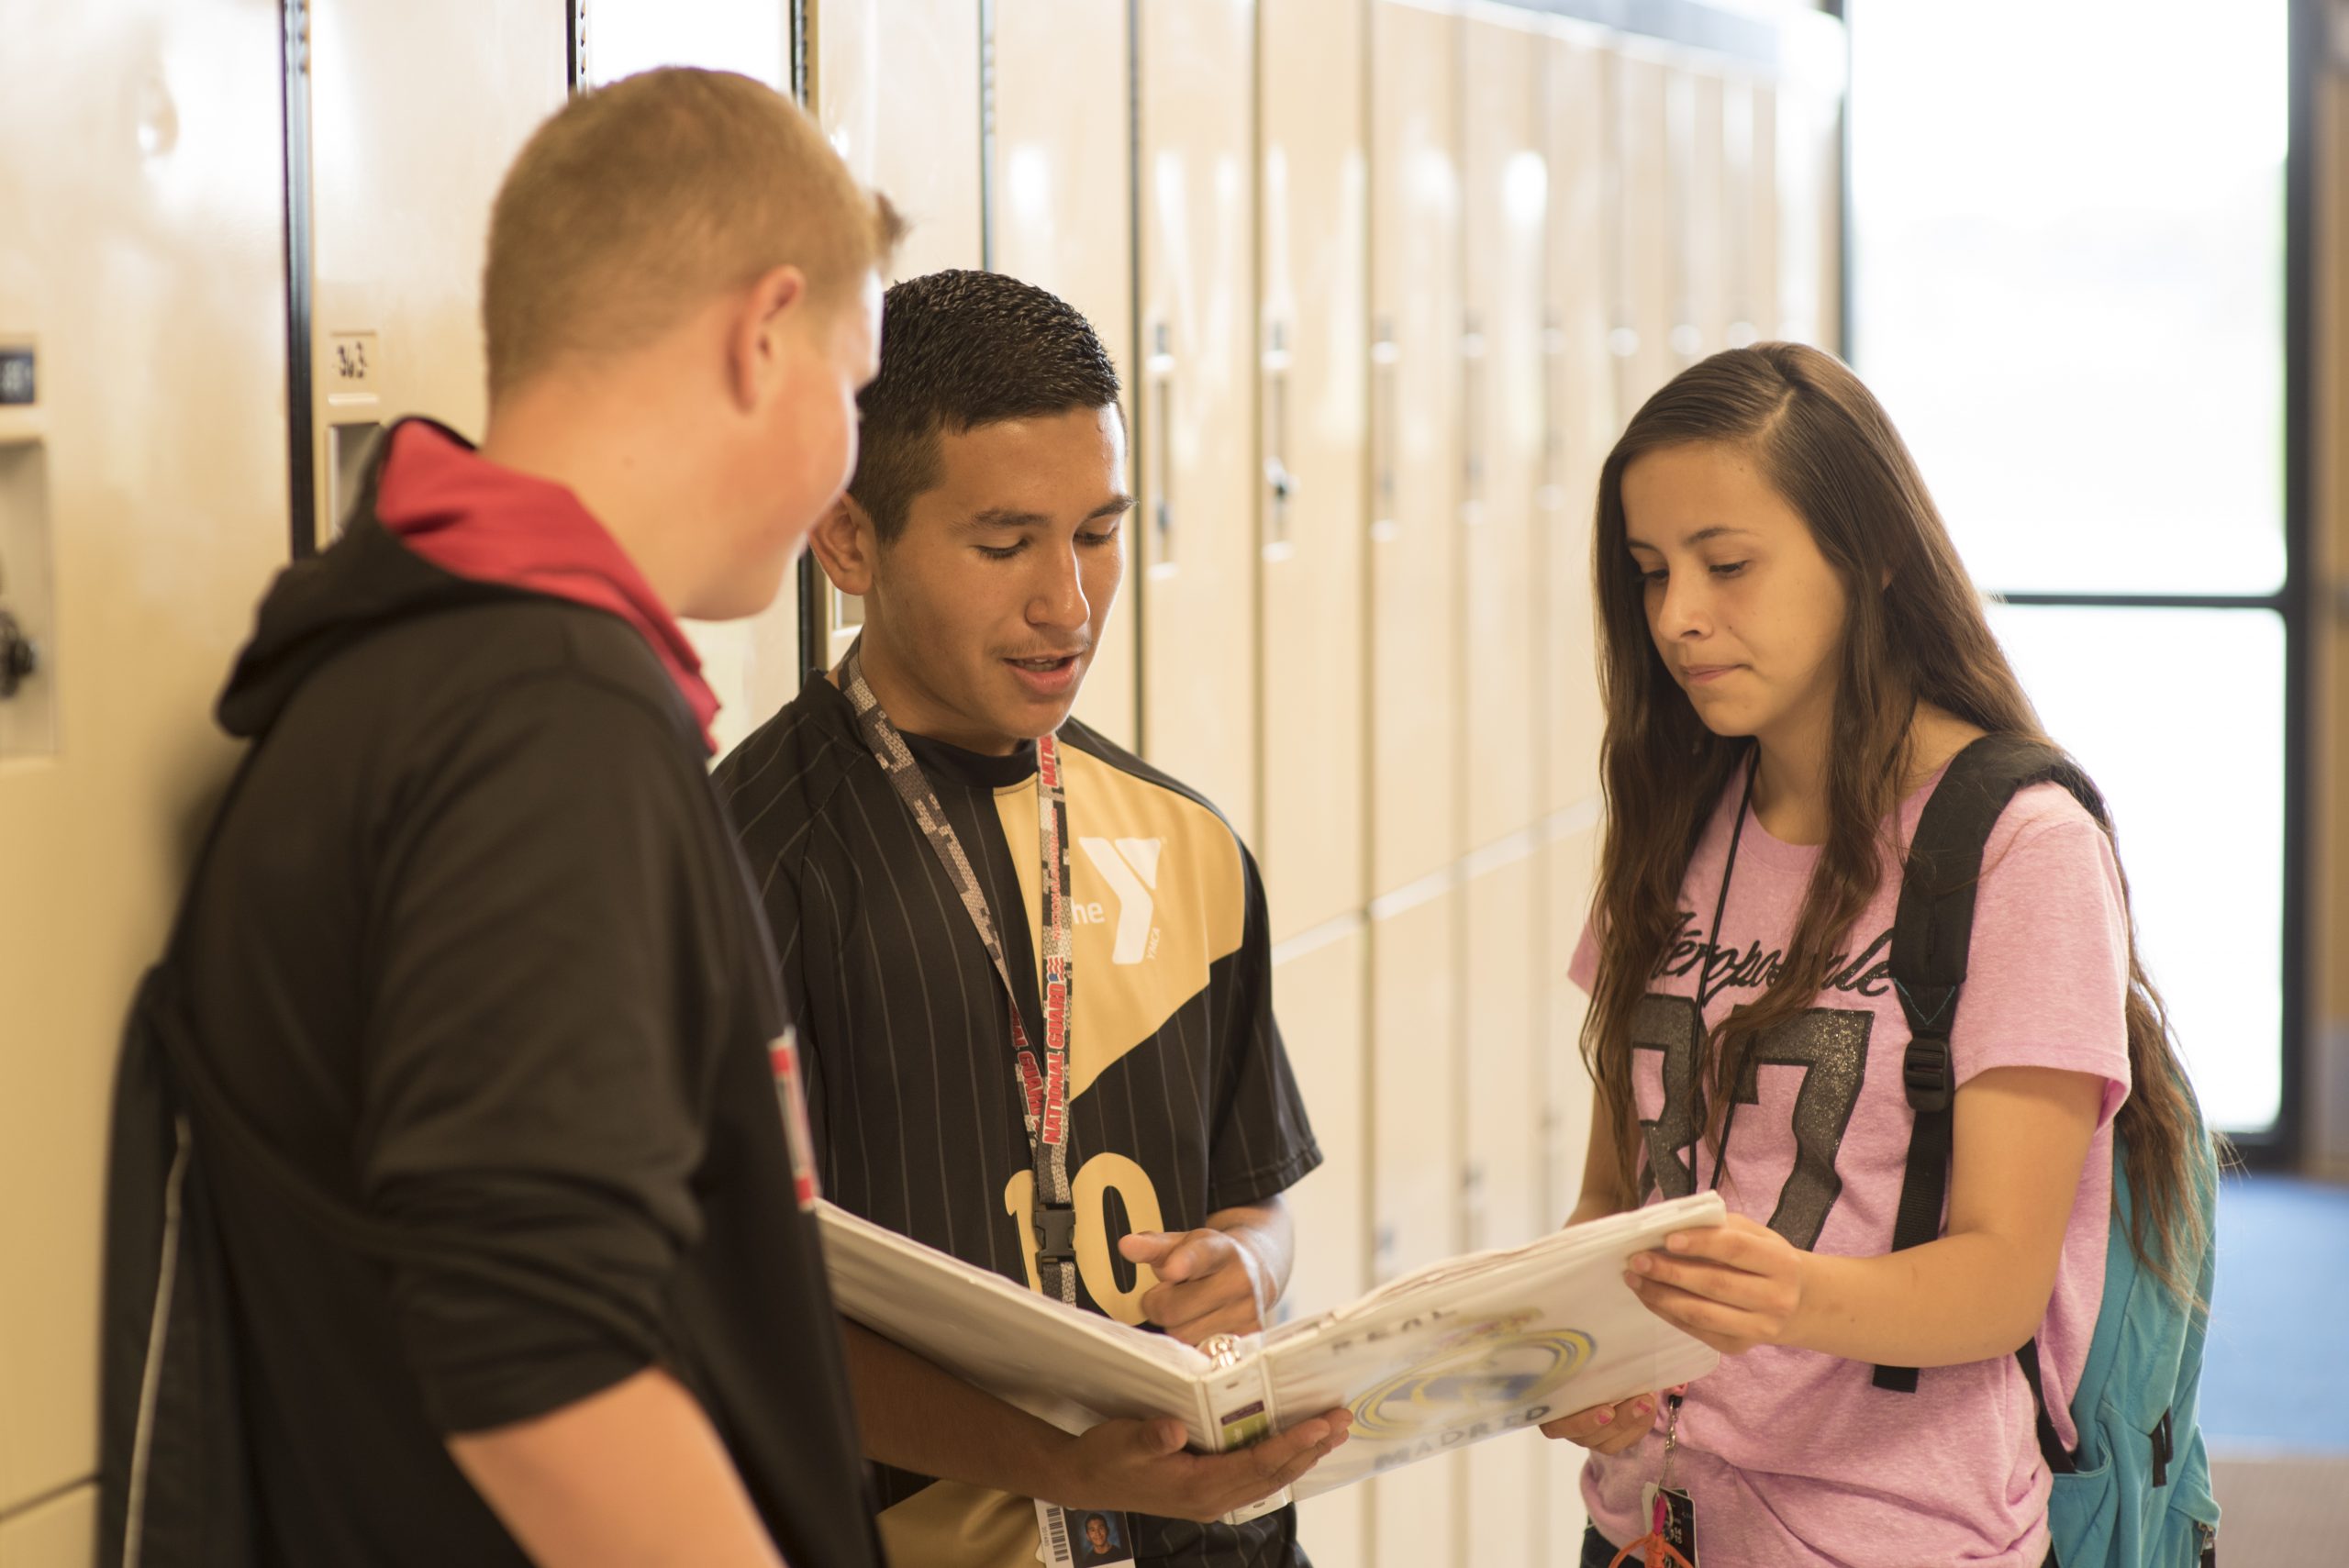 Three students reviewing contents of a binder in a school standing by lockers.